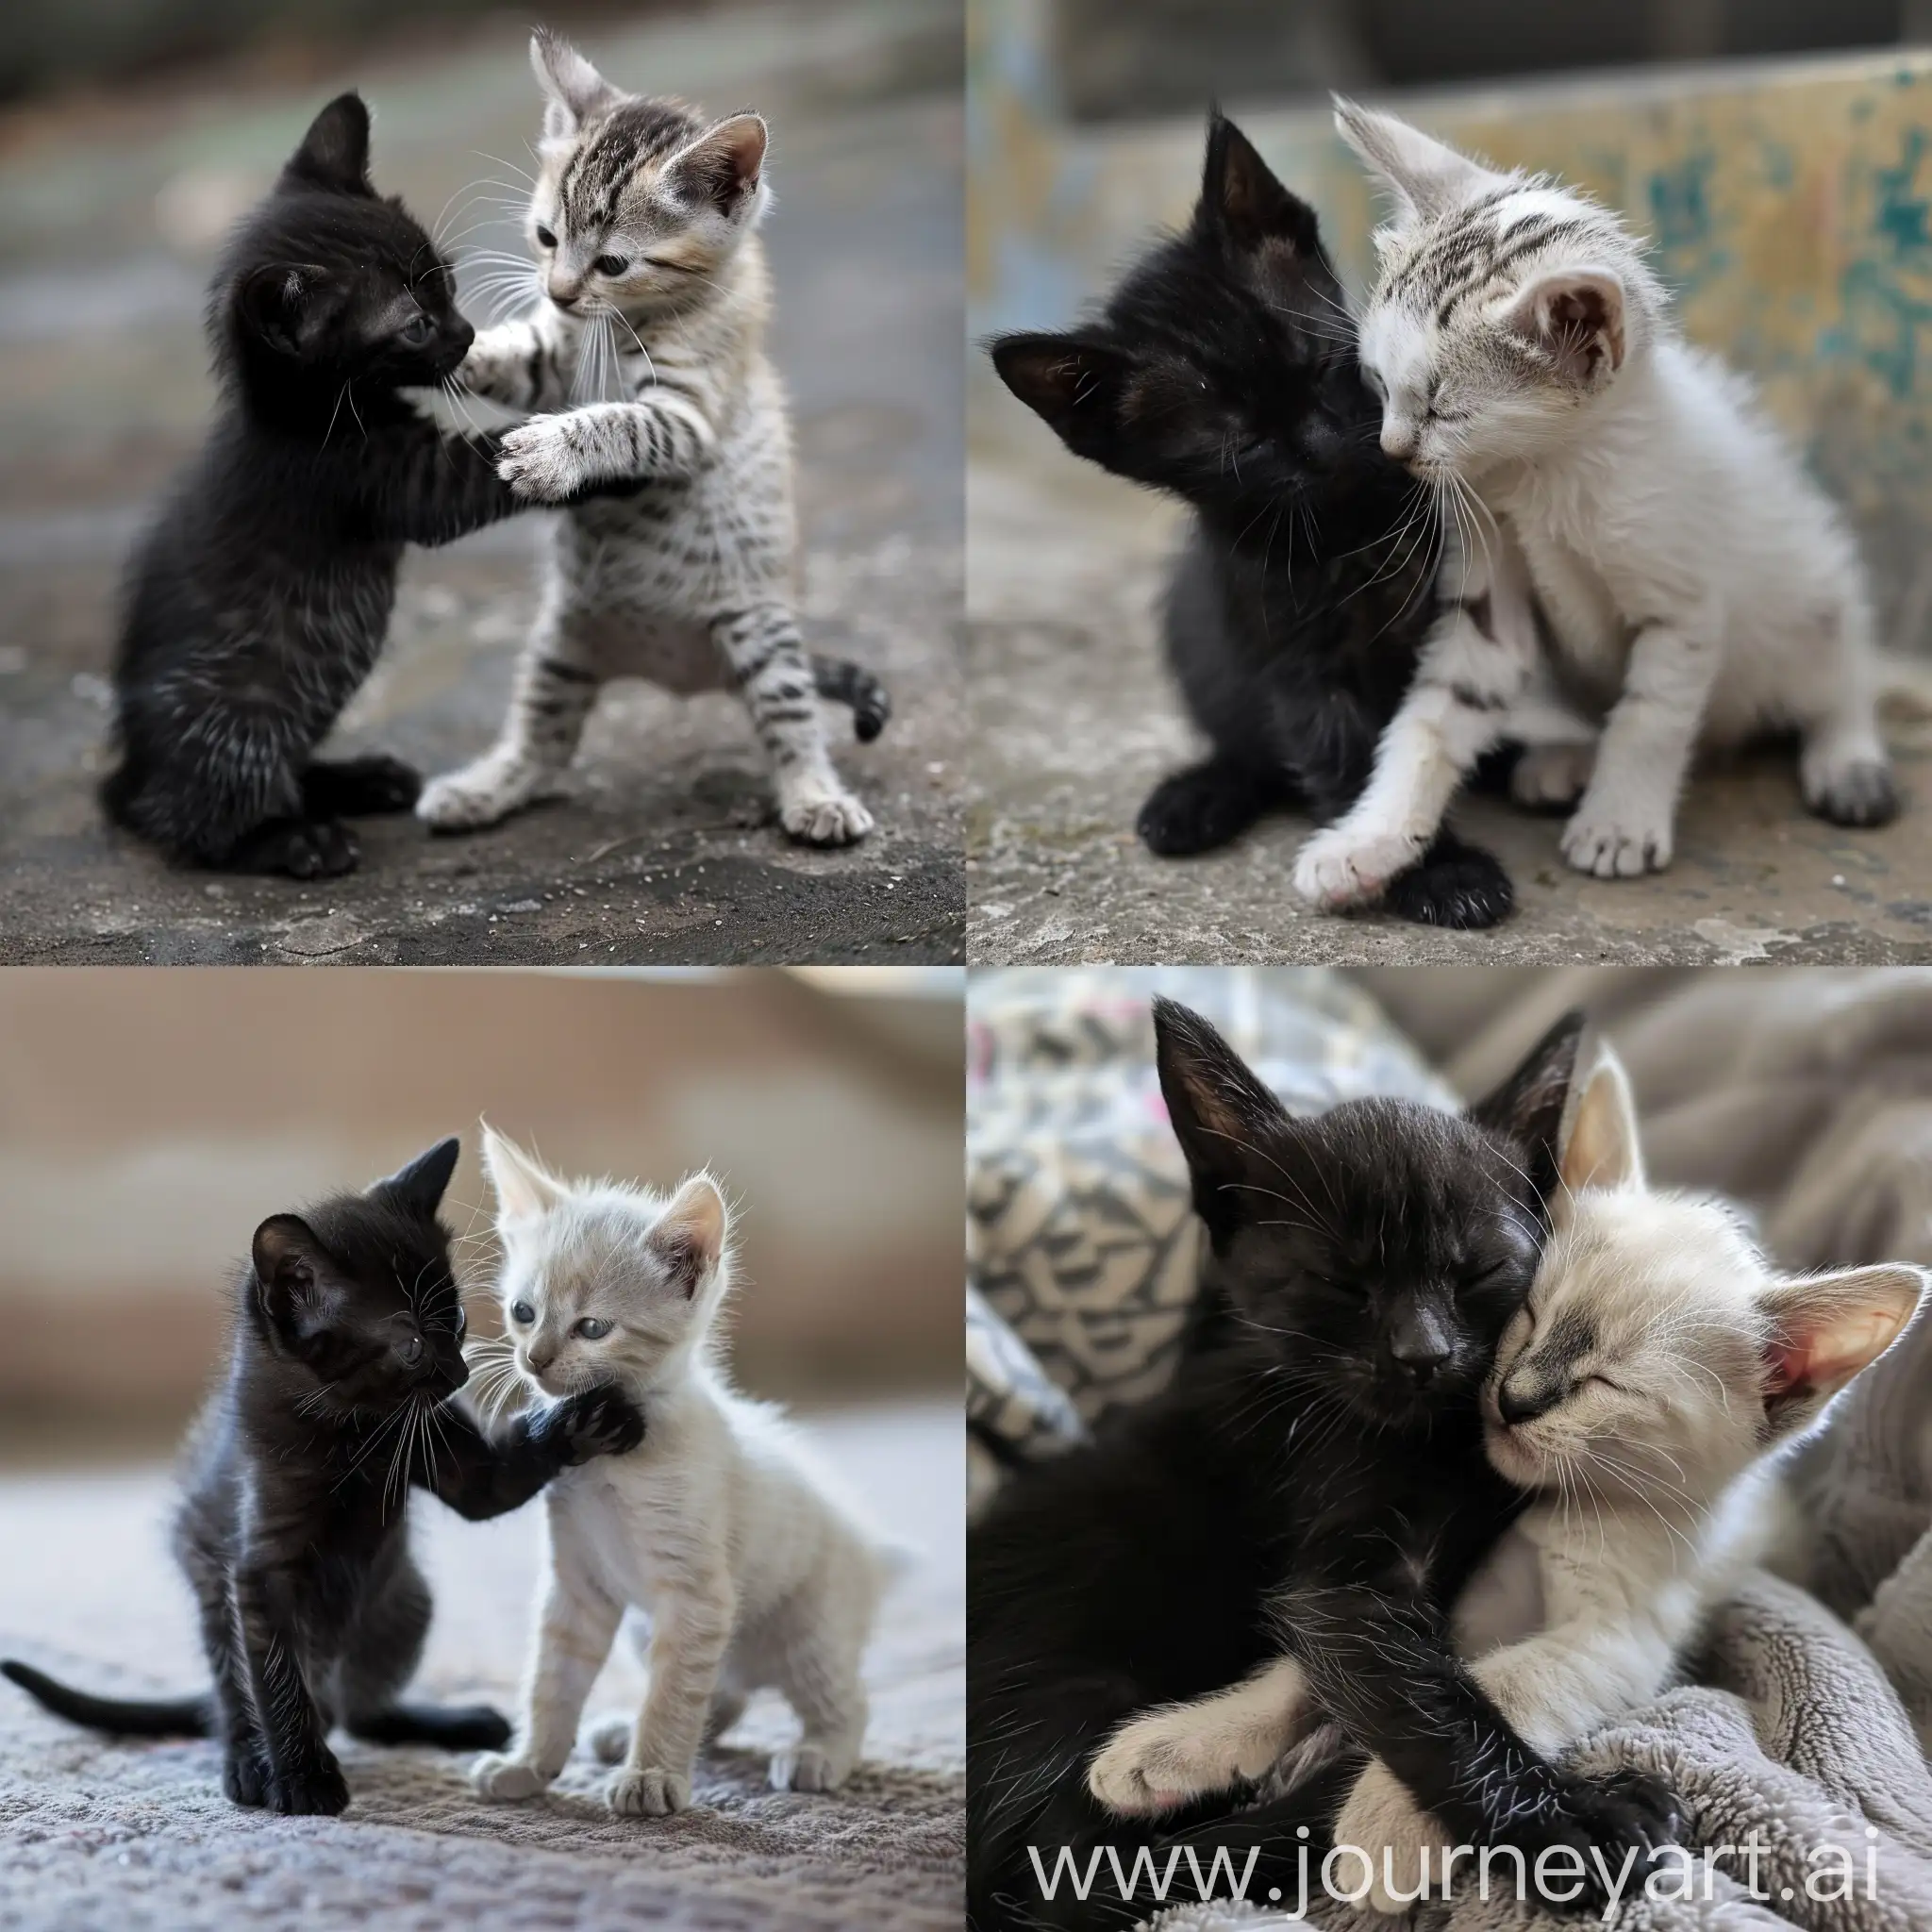 Black-and-White-Kittens-Playing-Together-in-Joyful-Interaction